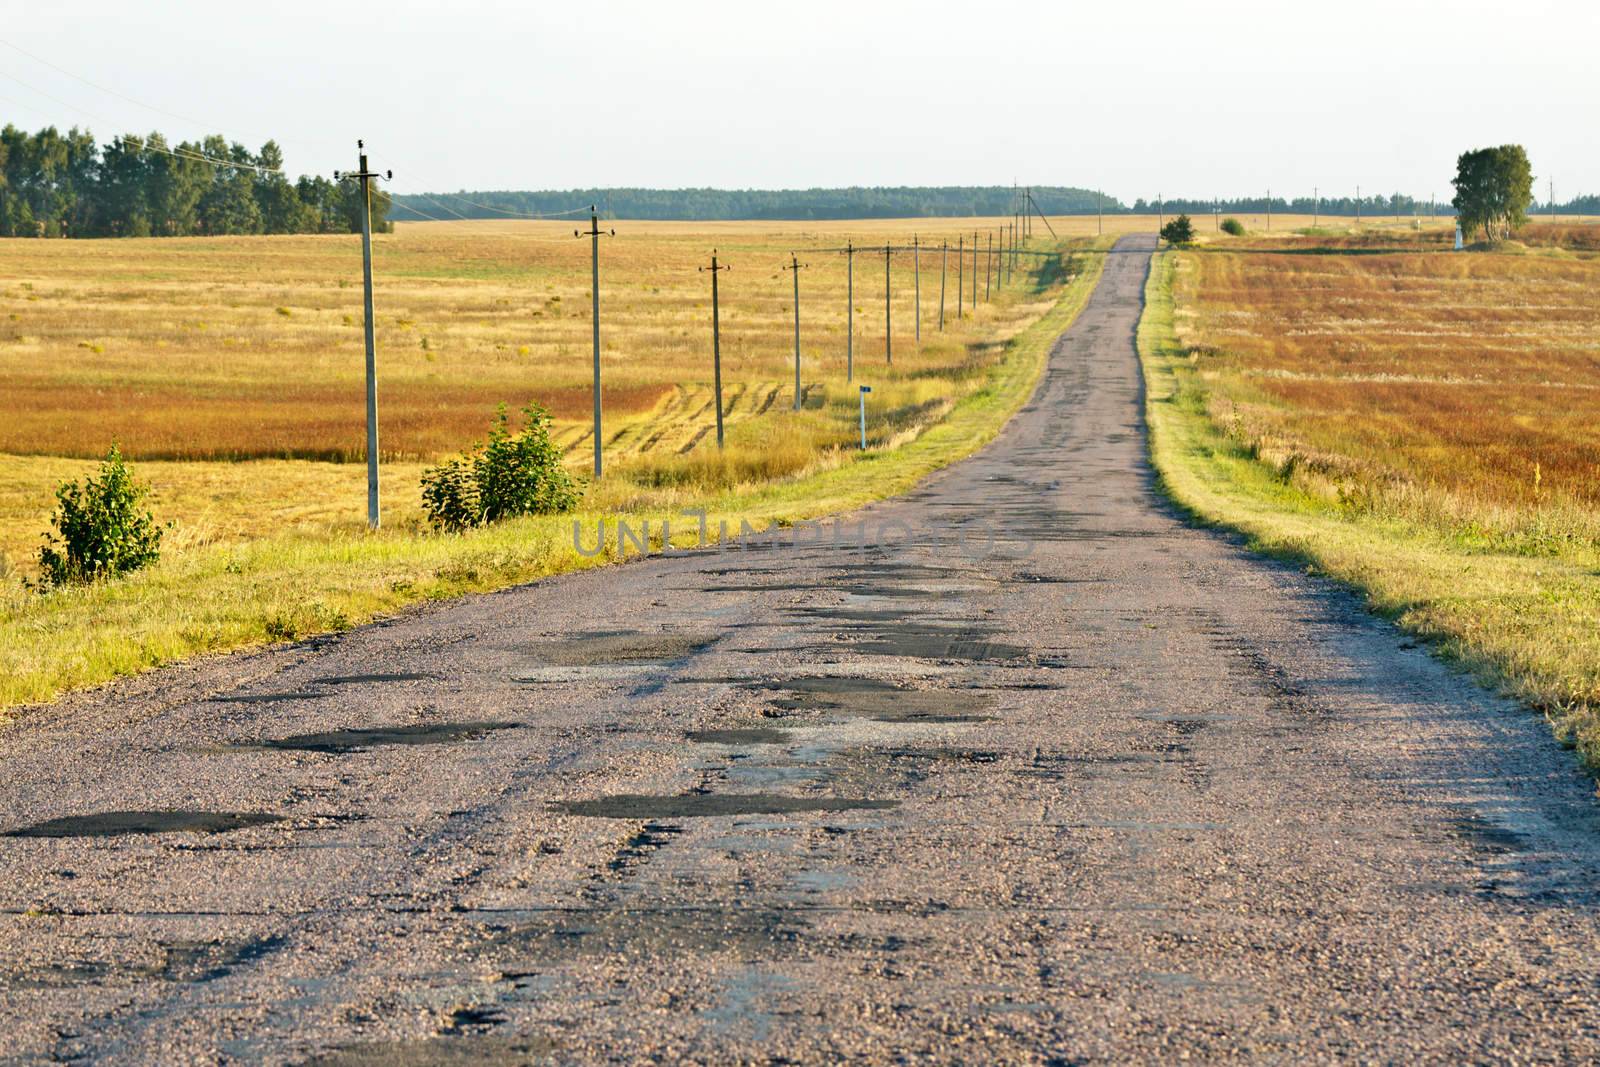 A perspective view of rough paved road in a countryside in a sunny late afternoon